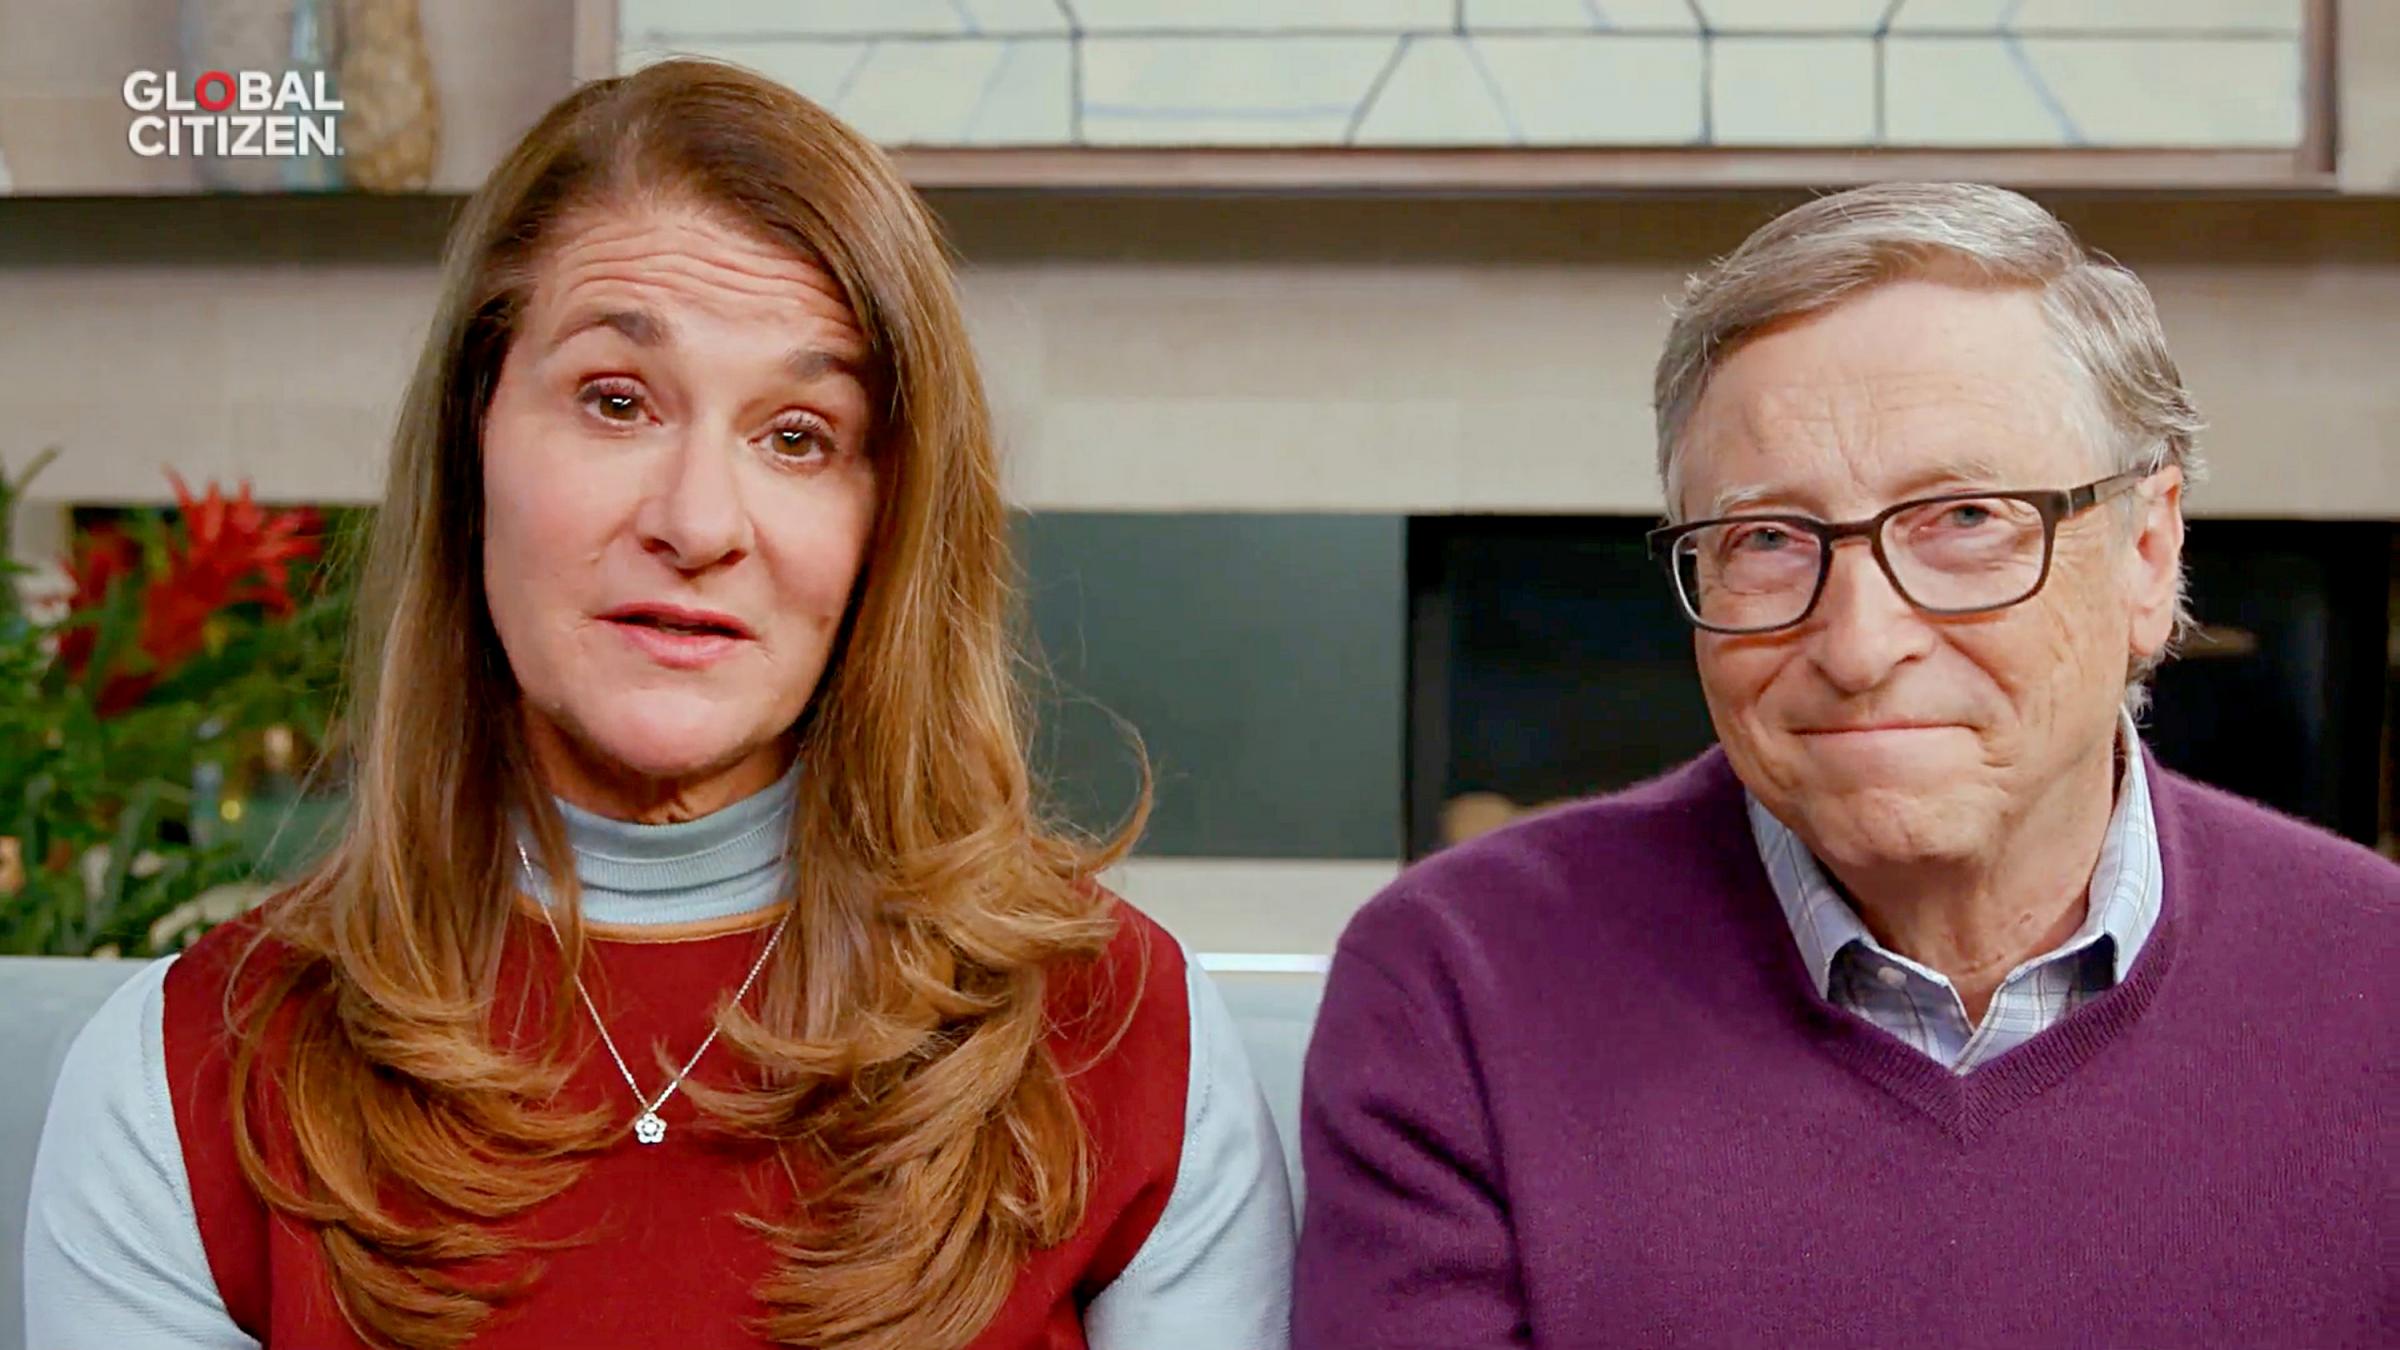 Handout photo issued by Global Citizen showing Bill and Melinda Gates during the One World broadcast, celebrating health workers on the front line of the coronavirus pandemic.